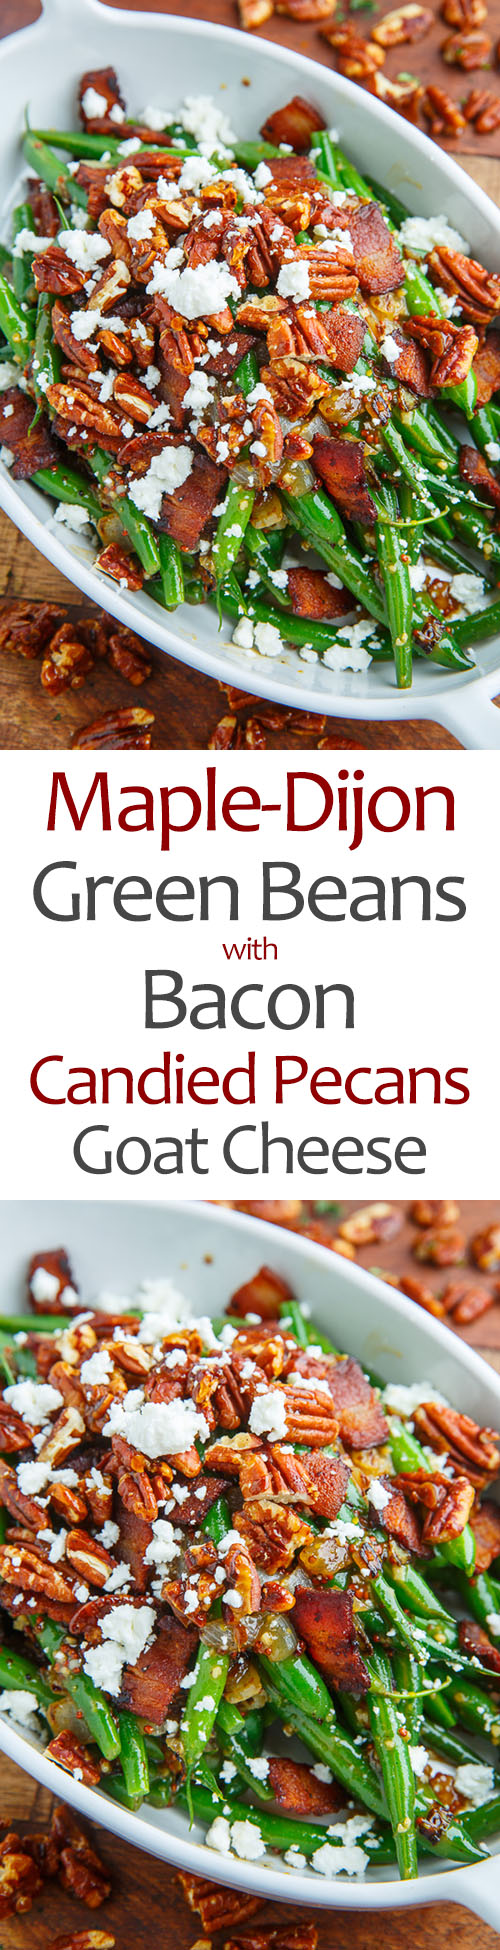 Maple Dijon Green Beans with Bacon, Candied Pecans and Goat Cheese